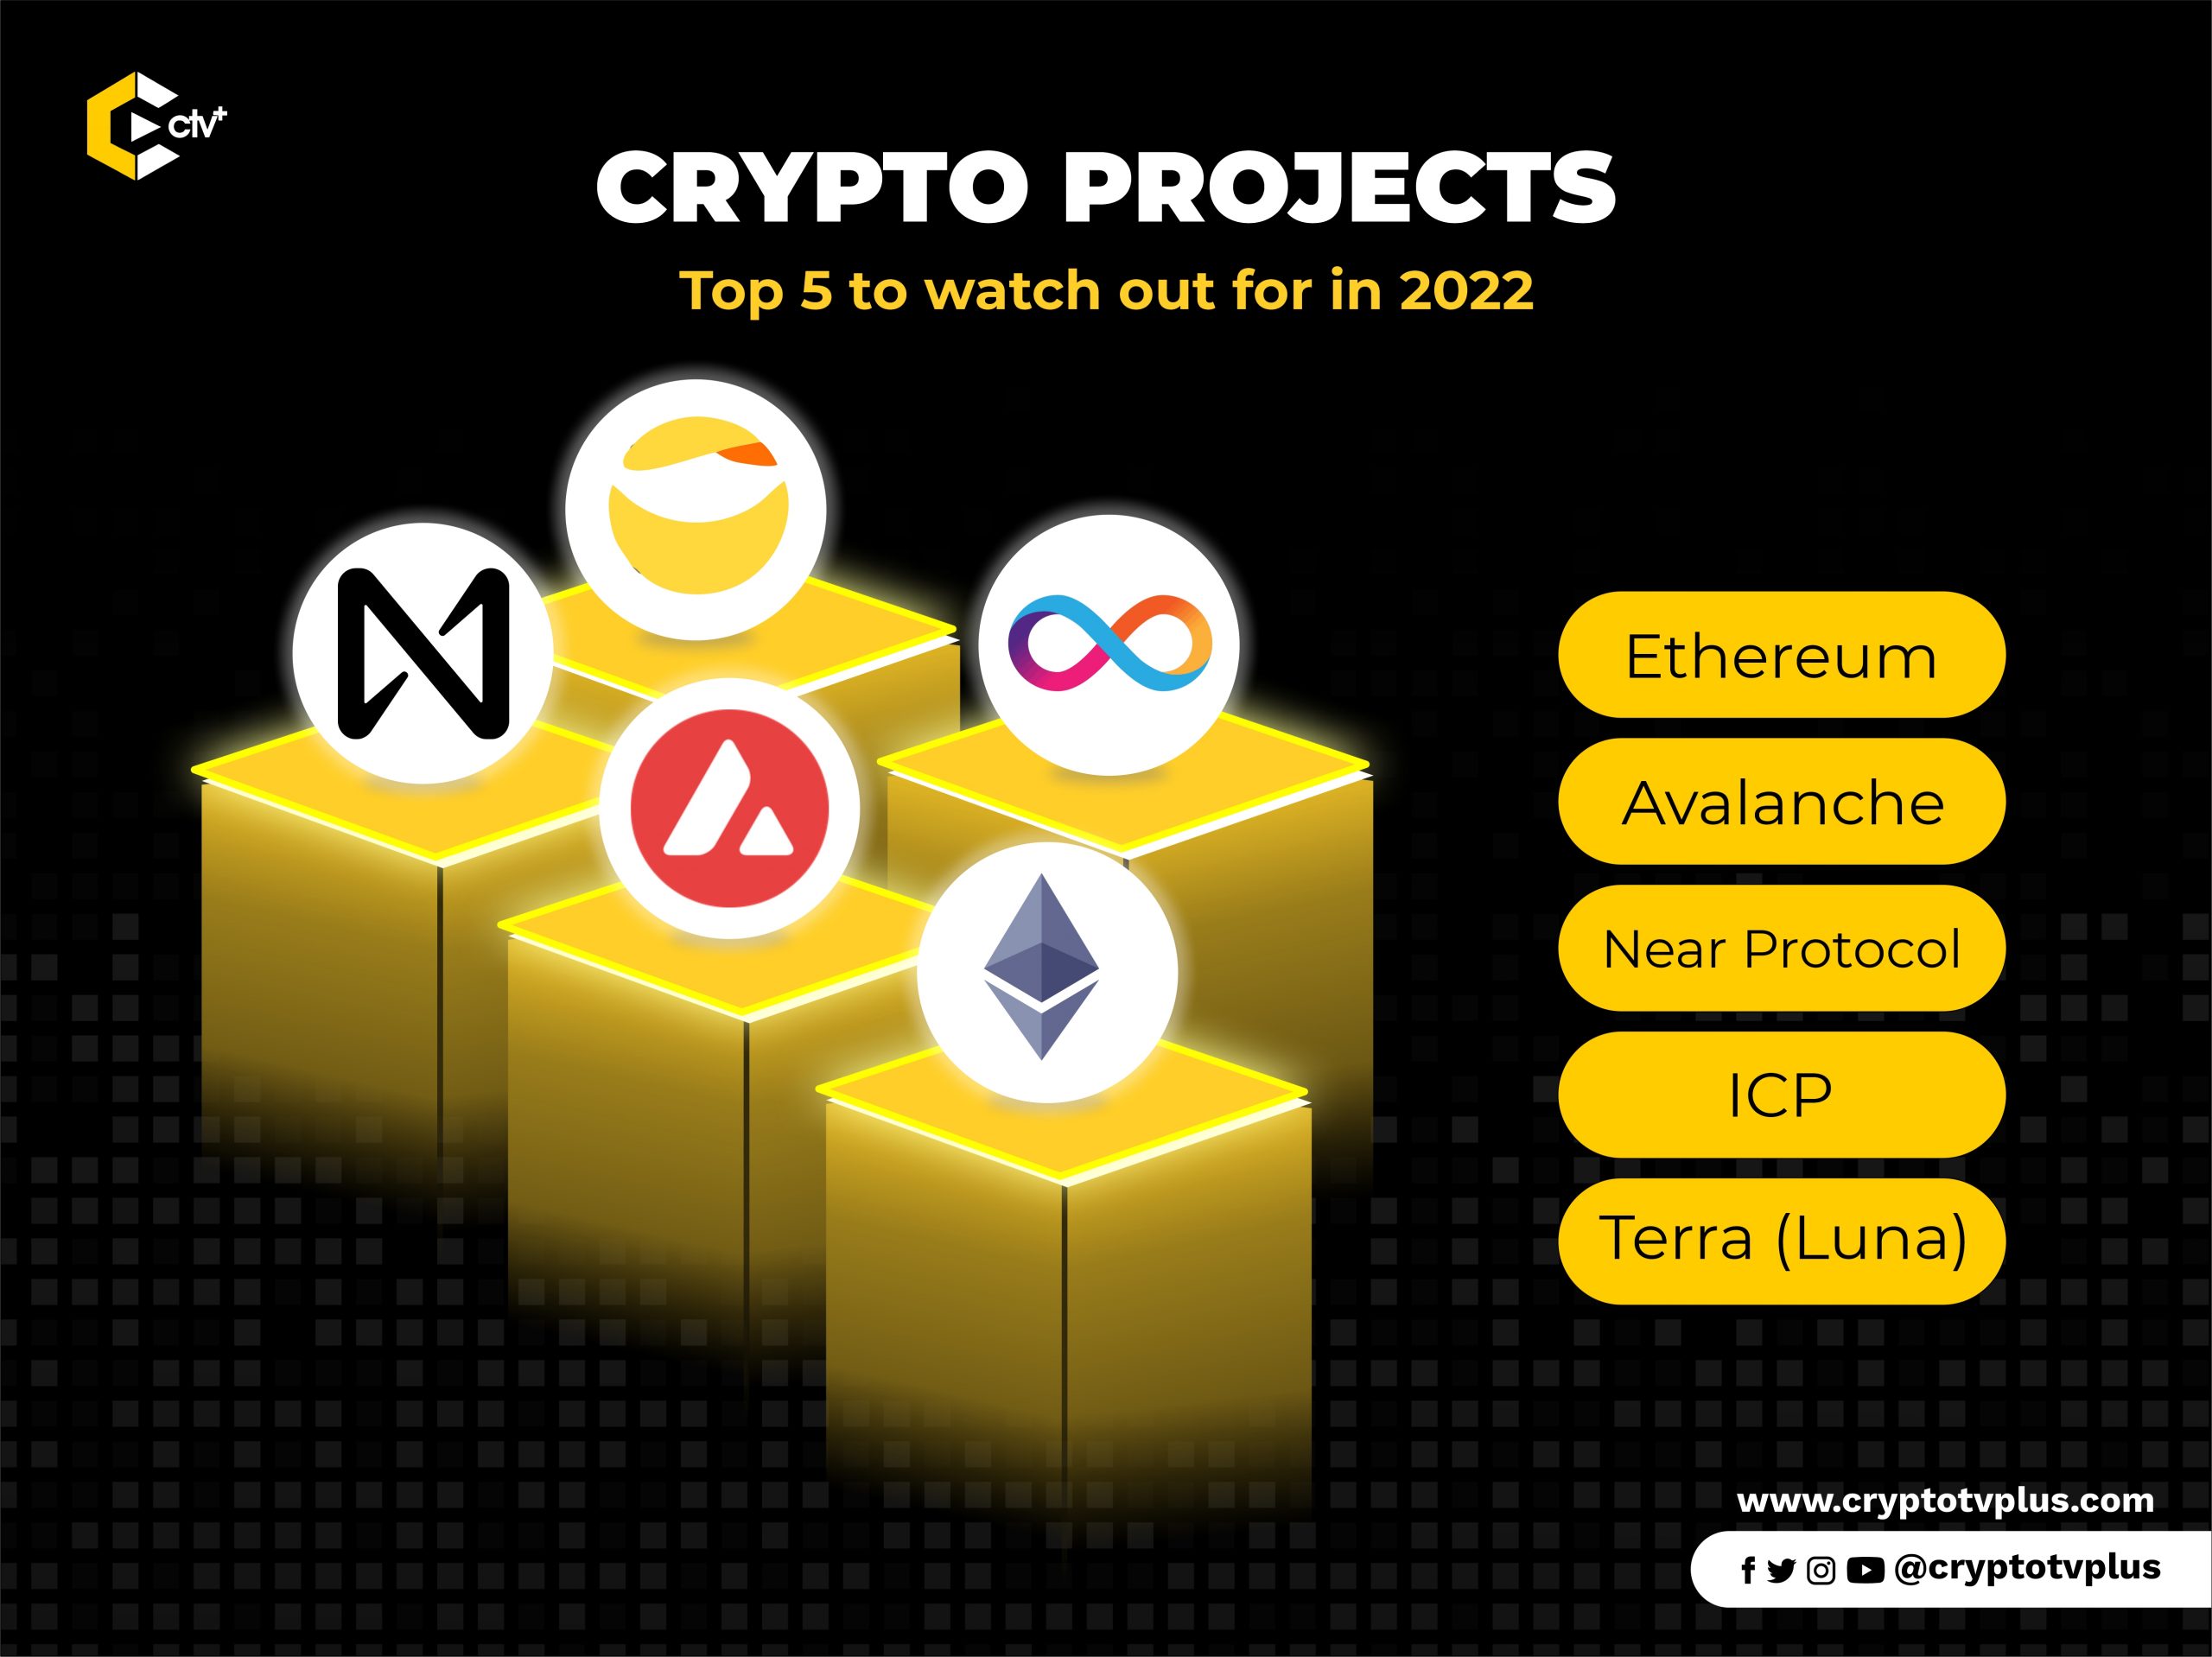 Top 5 Exciting Crypto Projects To Look Into In 2022